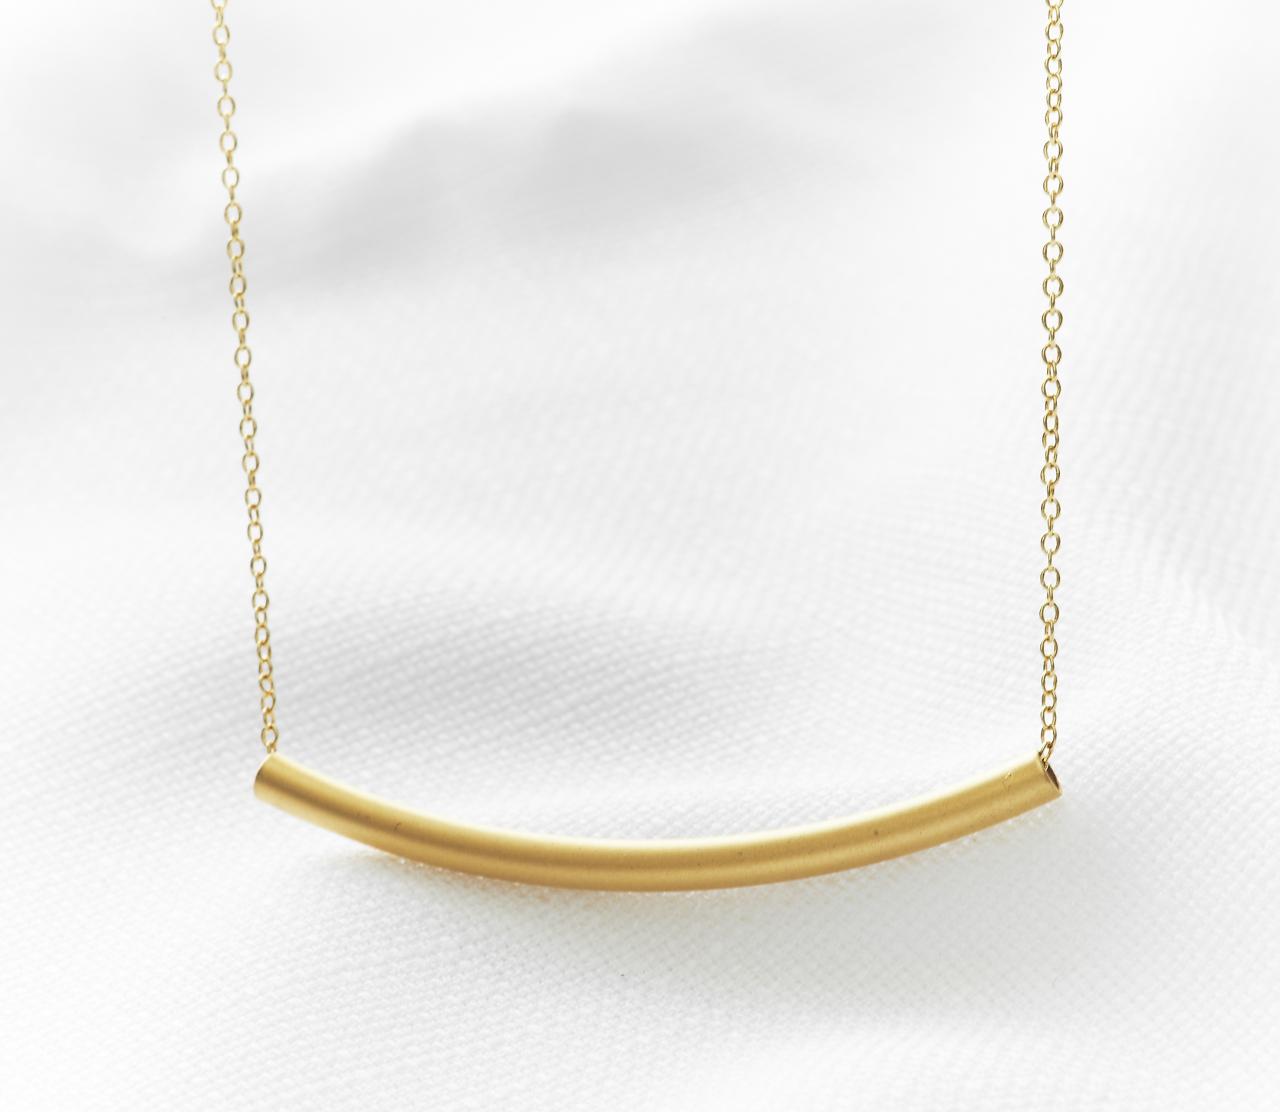 Gold bar necklace, Curve necklace, Gold tube necklace, Delicate gold jewelry, Modern necklace, Jewelry gift, Simple gold necklace